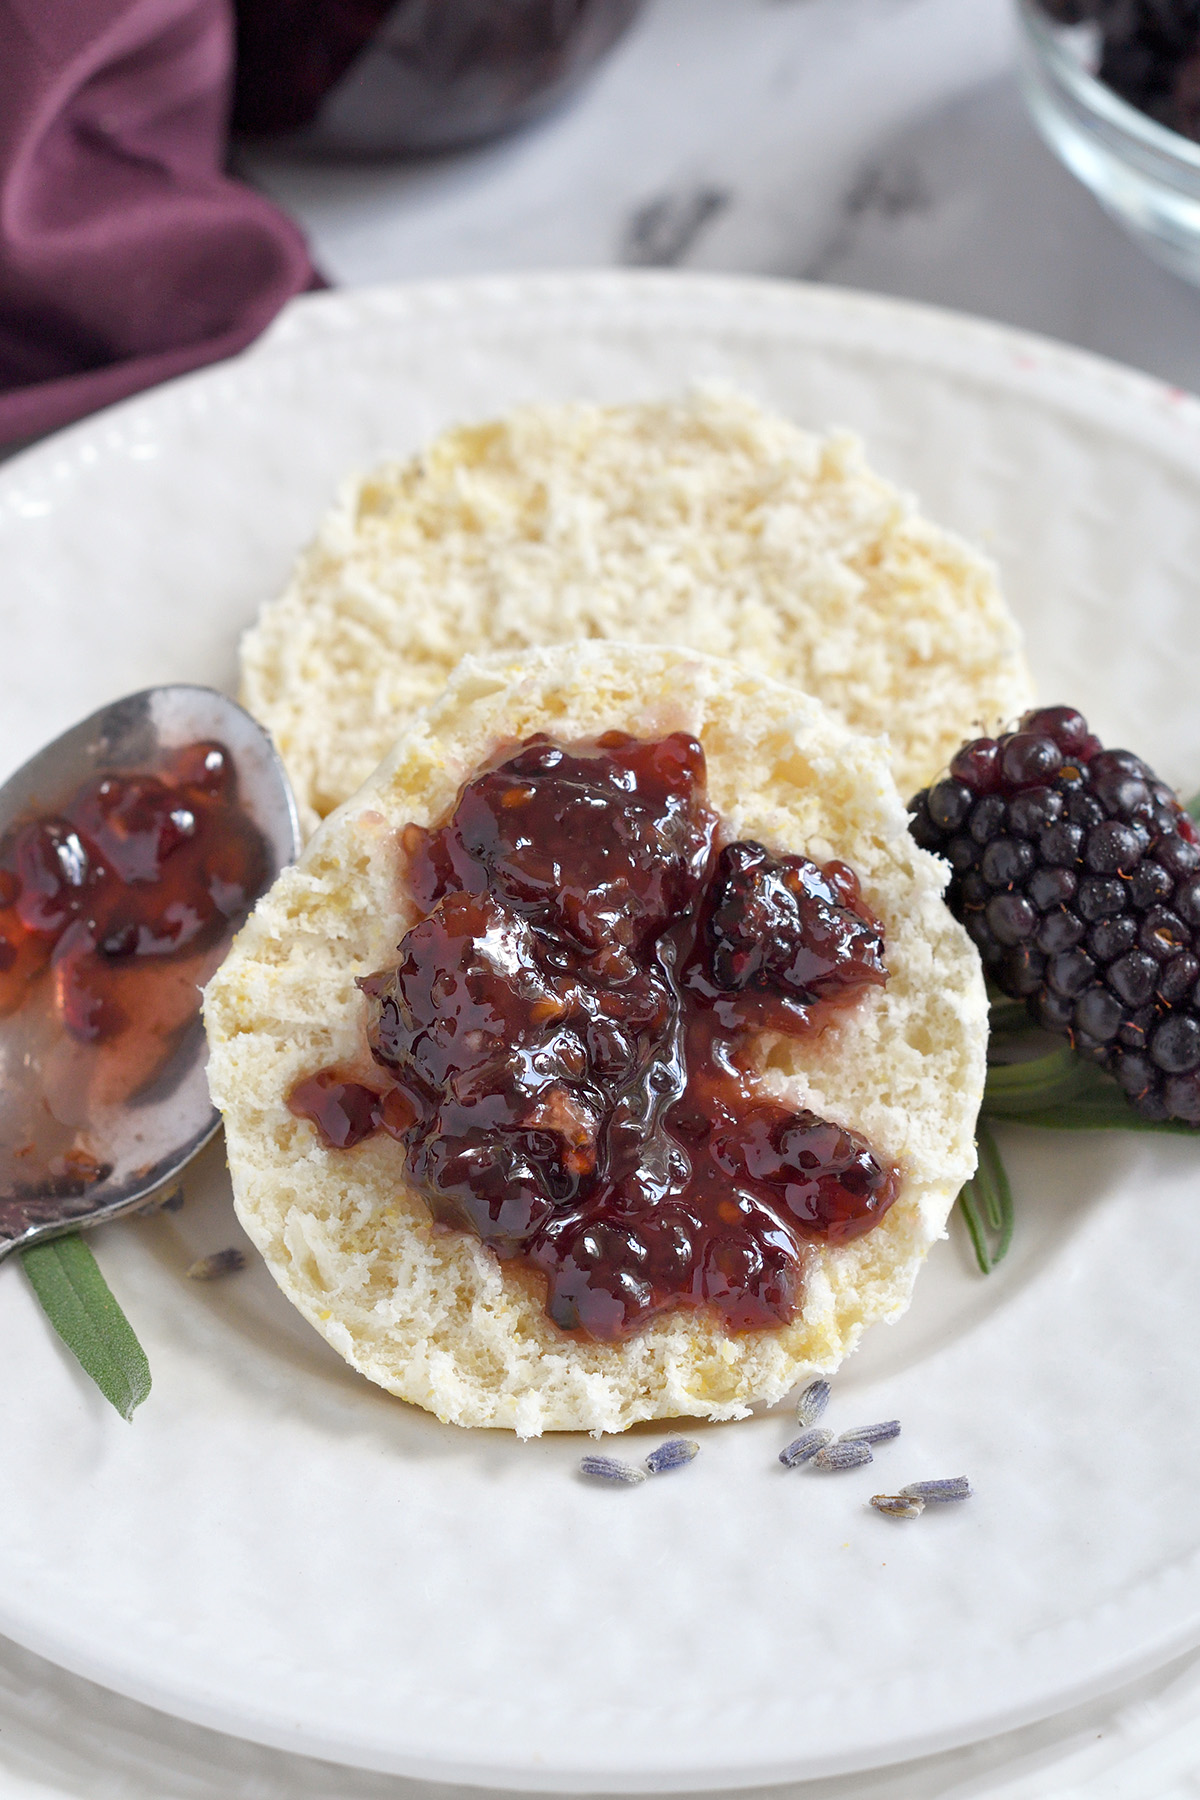 blackberry preserves on an english muffin on a white plate.